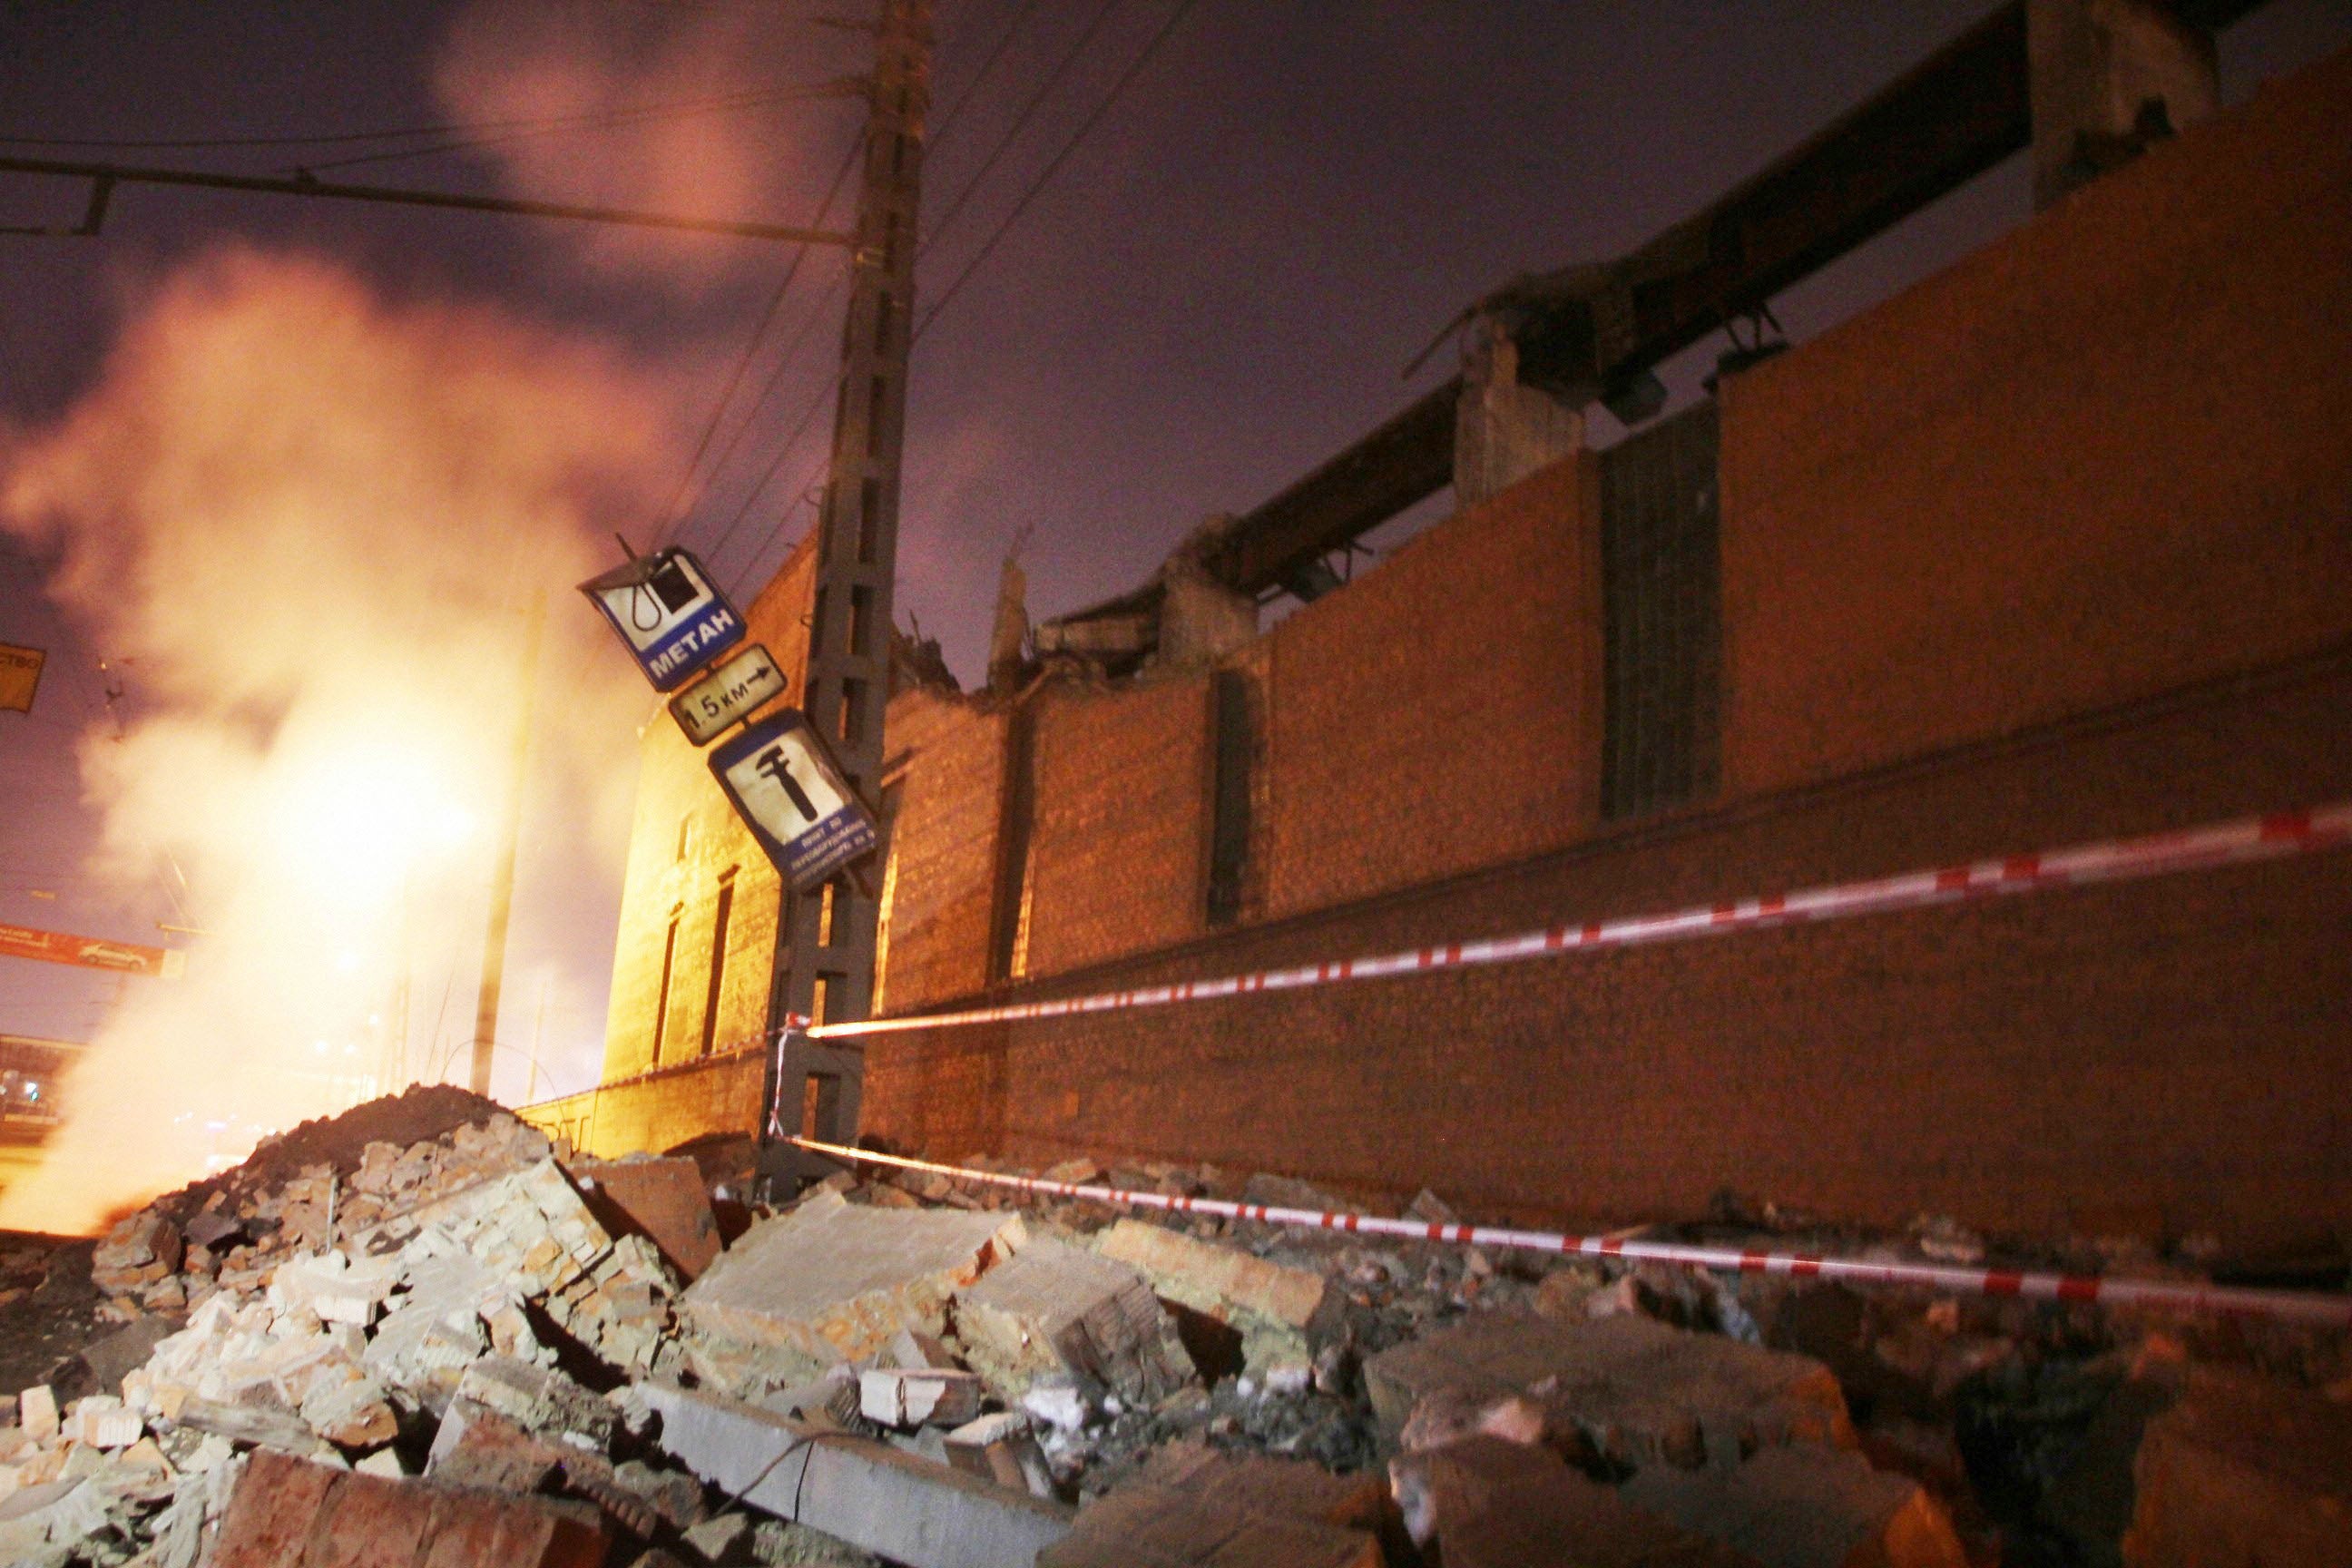 Damage to a local factory following the explosion of the Chelyabinsk meteor and meteorites that impacted the area. (Image: Kyodo, AP)